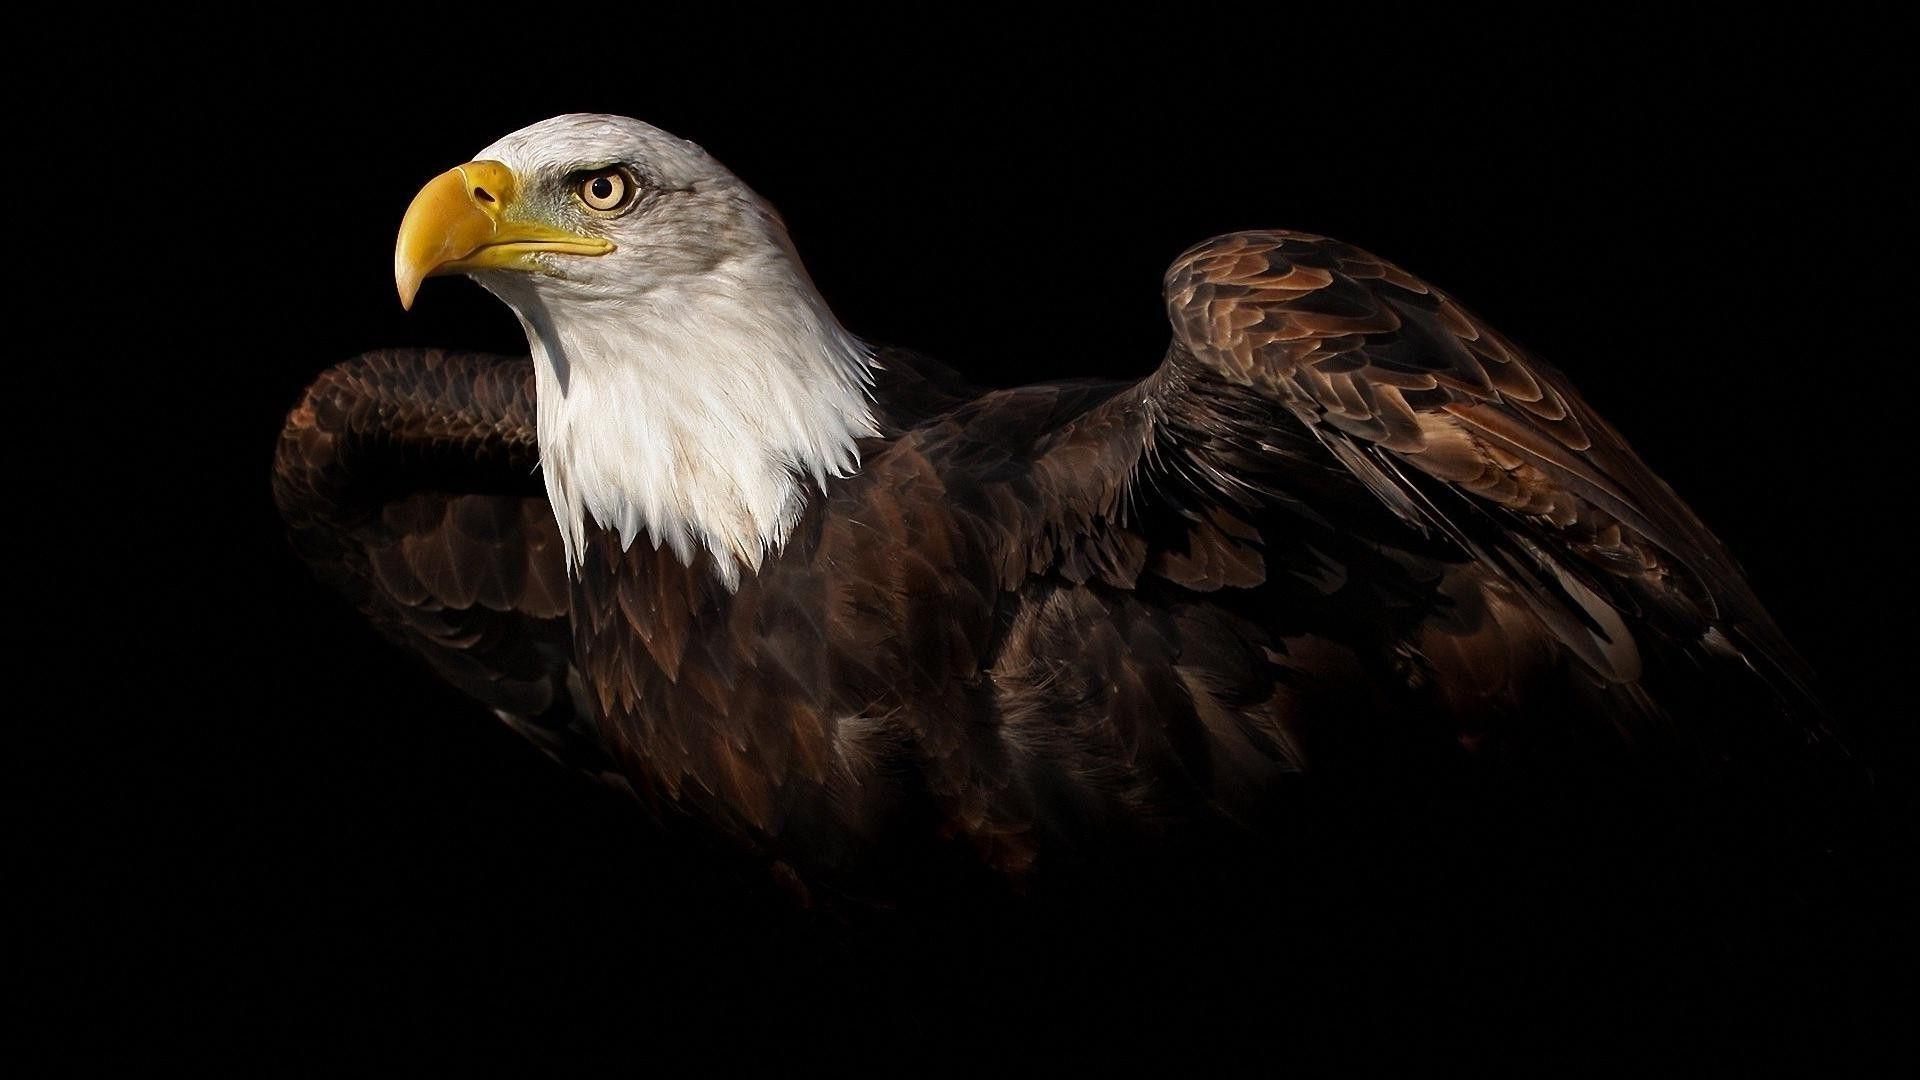 Top Eagle HD Wallpaper Background Image Photo Free Download